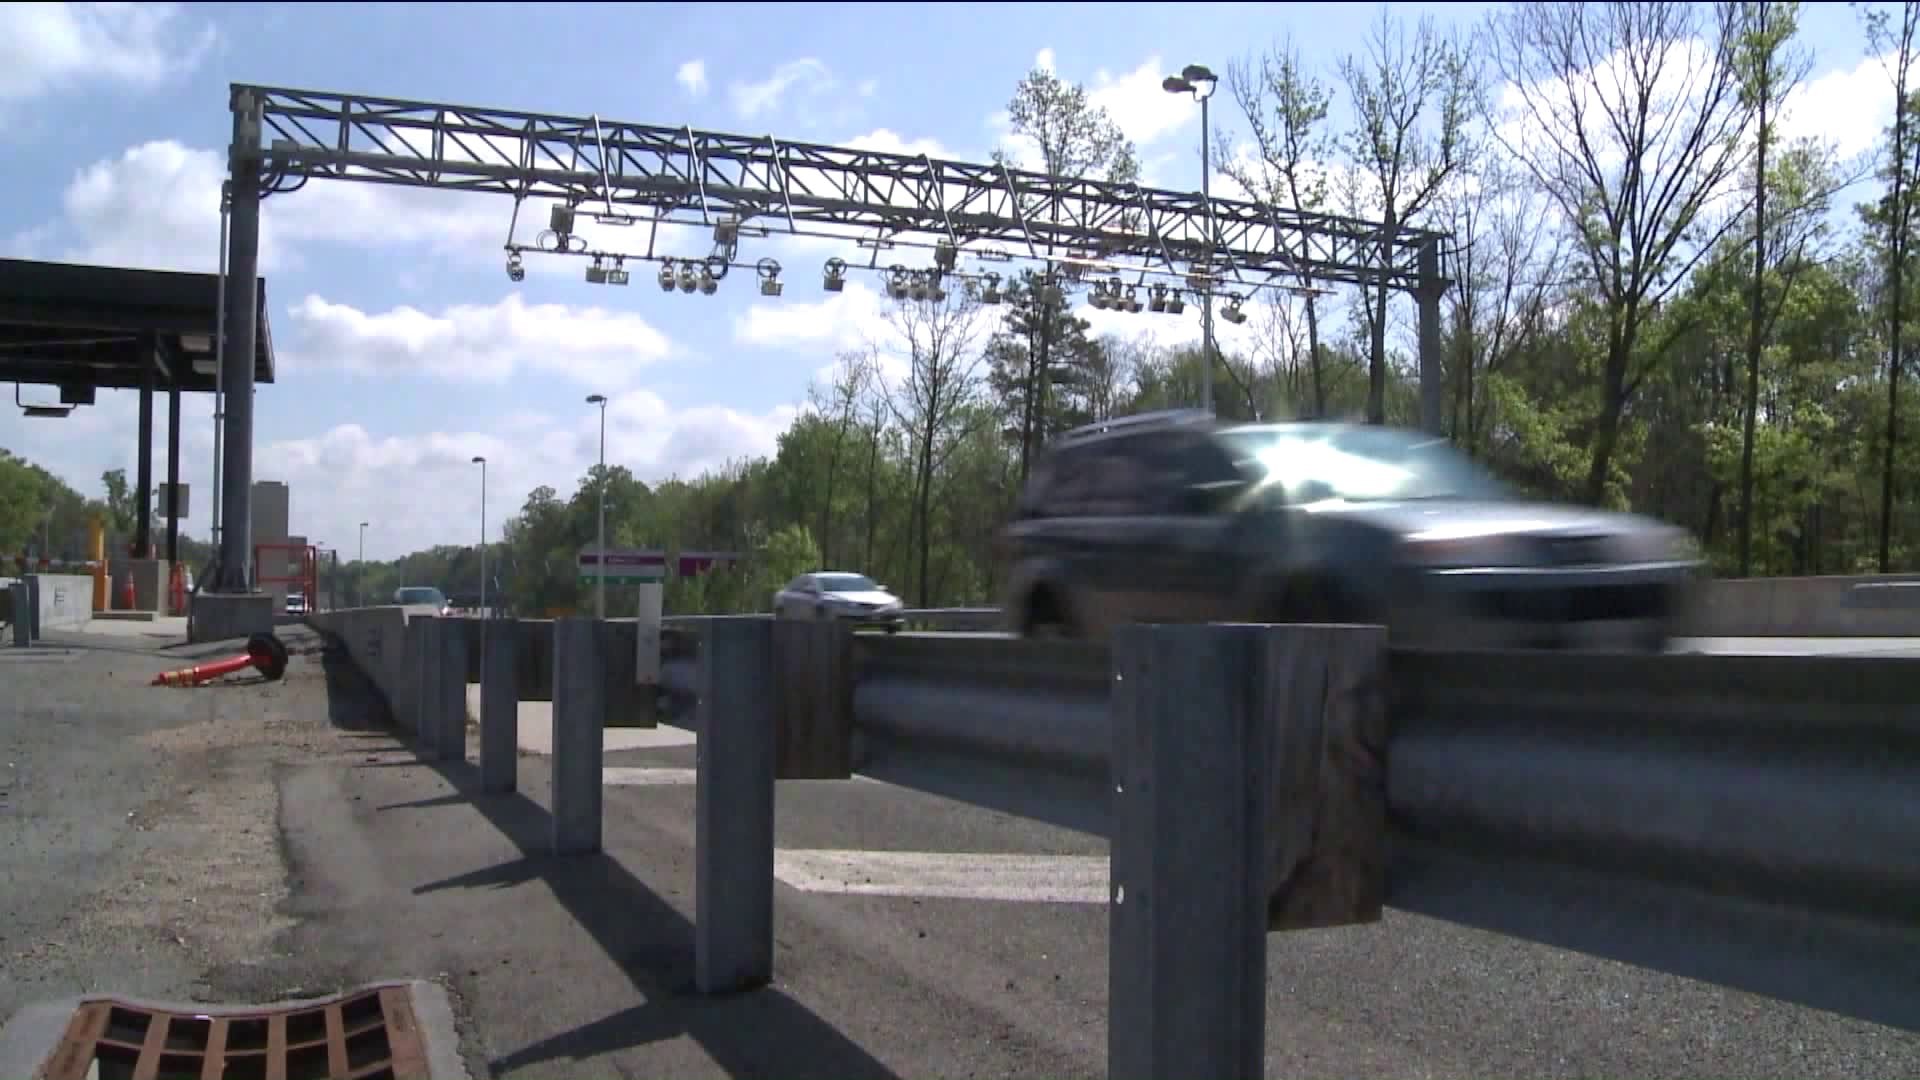 Toll bills have some similarities, but also key differences